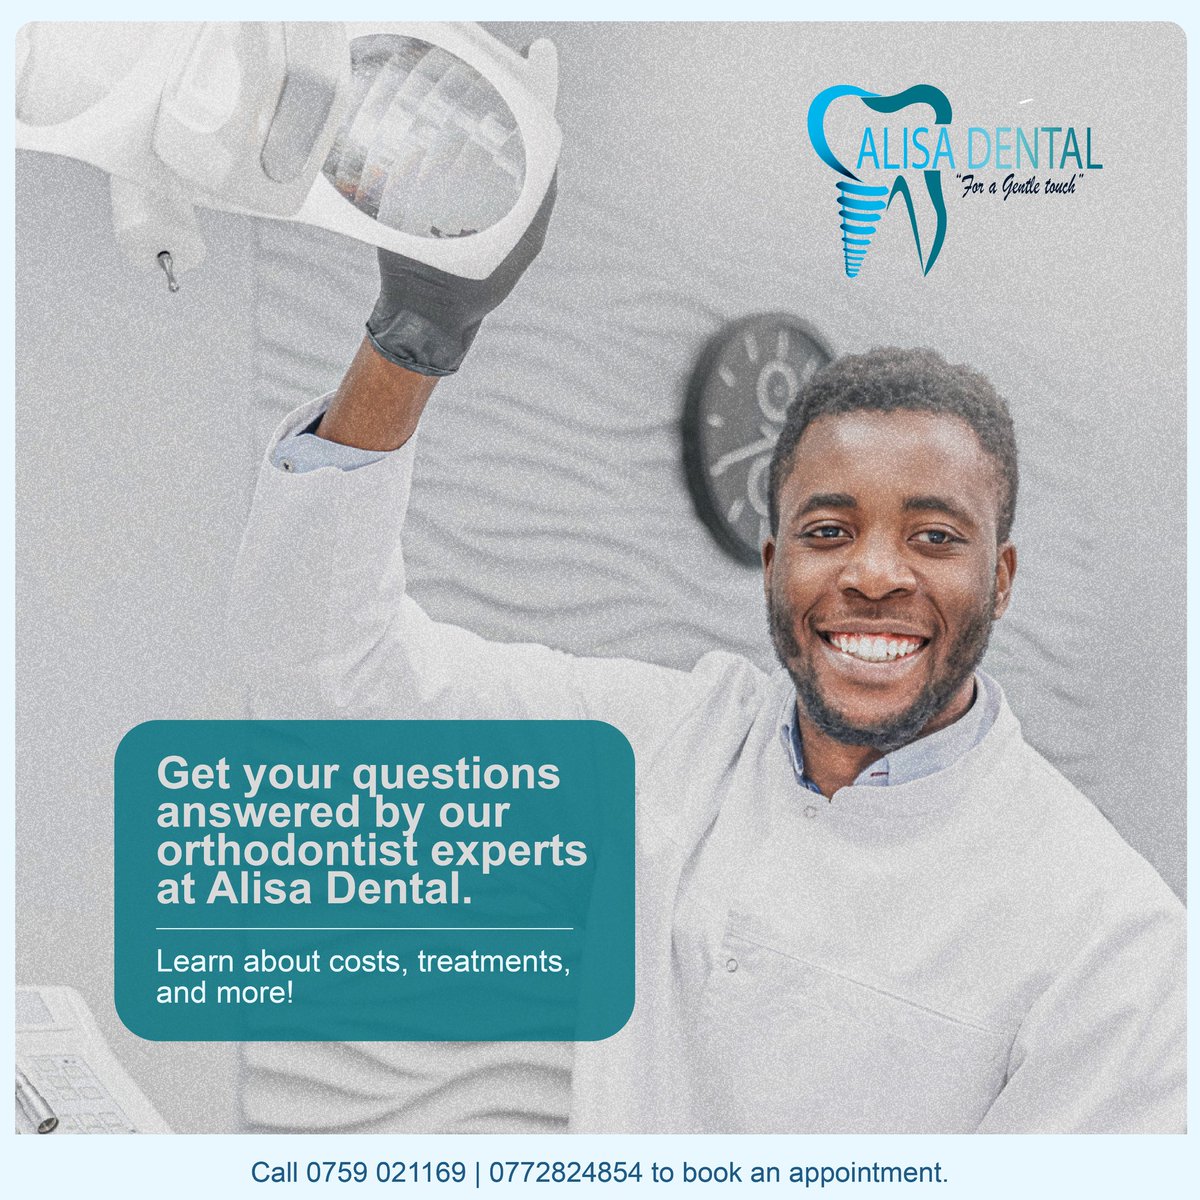 Are you curious about braces? 
Our orthodontists at Alisa Dental are here to answer your questions! From costs to treatments, get the intel you need for a confident smile.
Ask away! 
Call 0759021169 | 0772824854
#AlisaBracesExperts #braces #toothdecay #oralhealthforkids